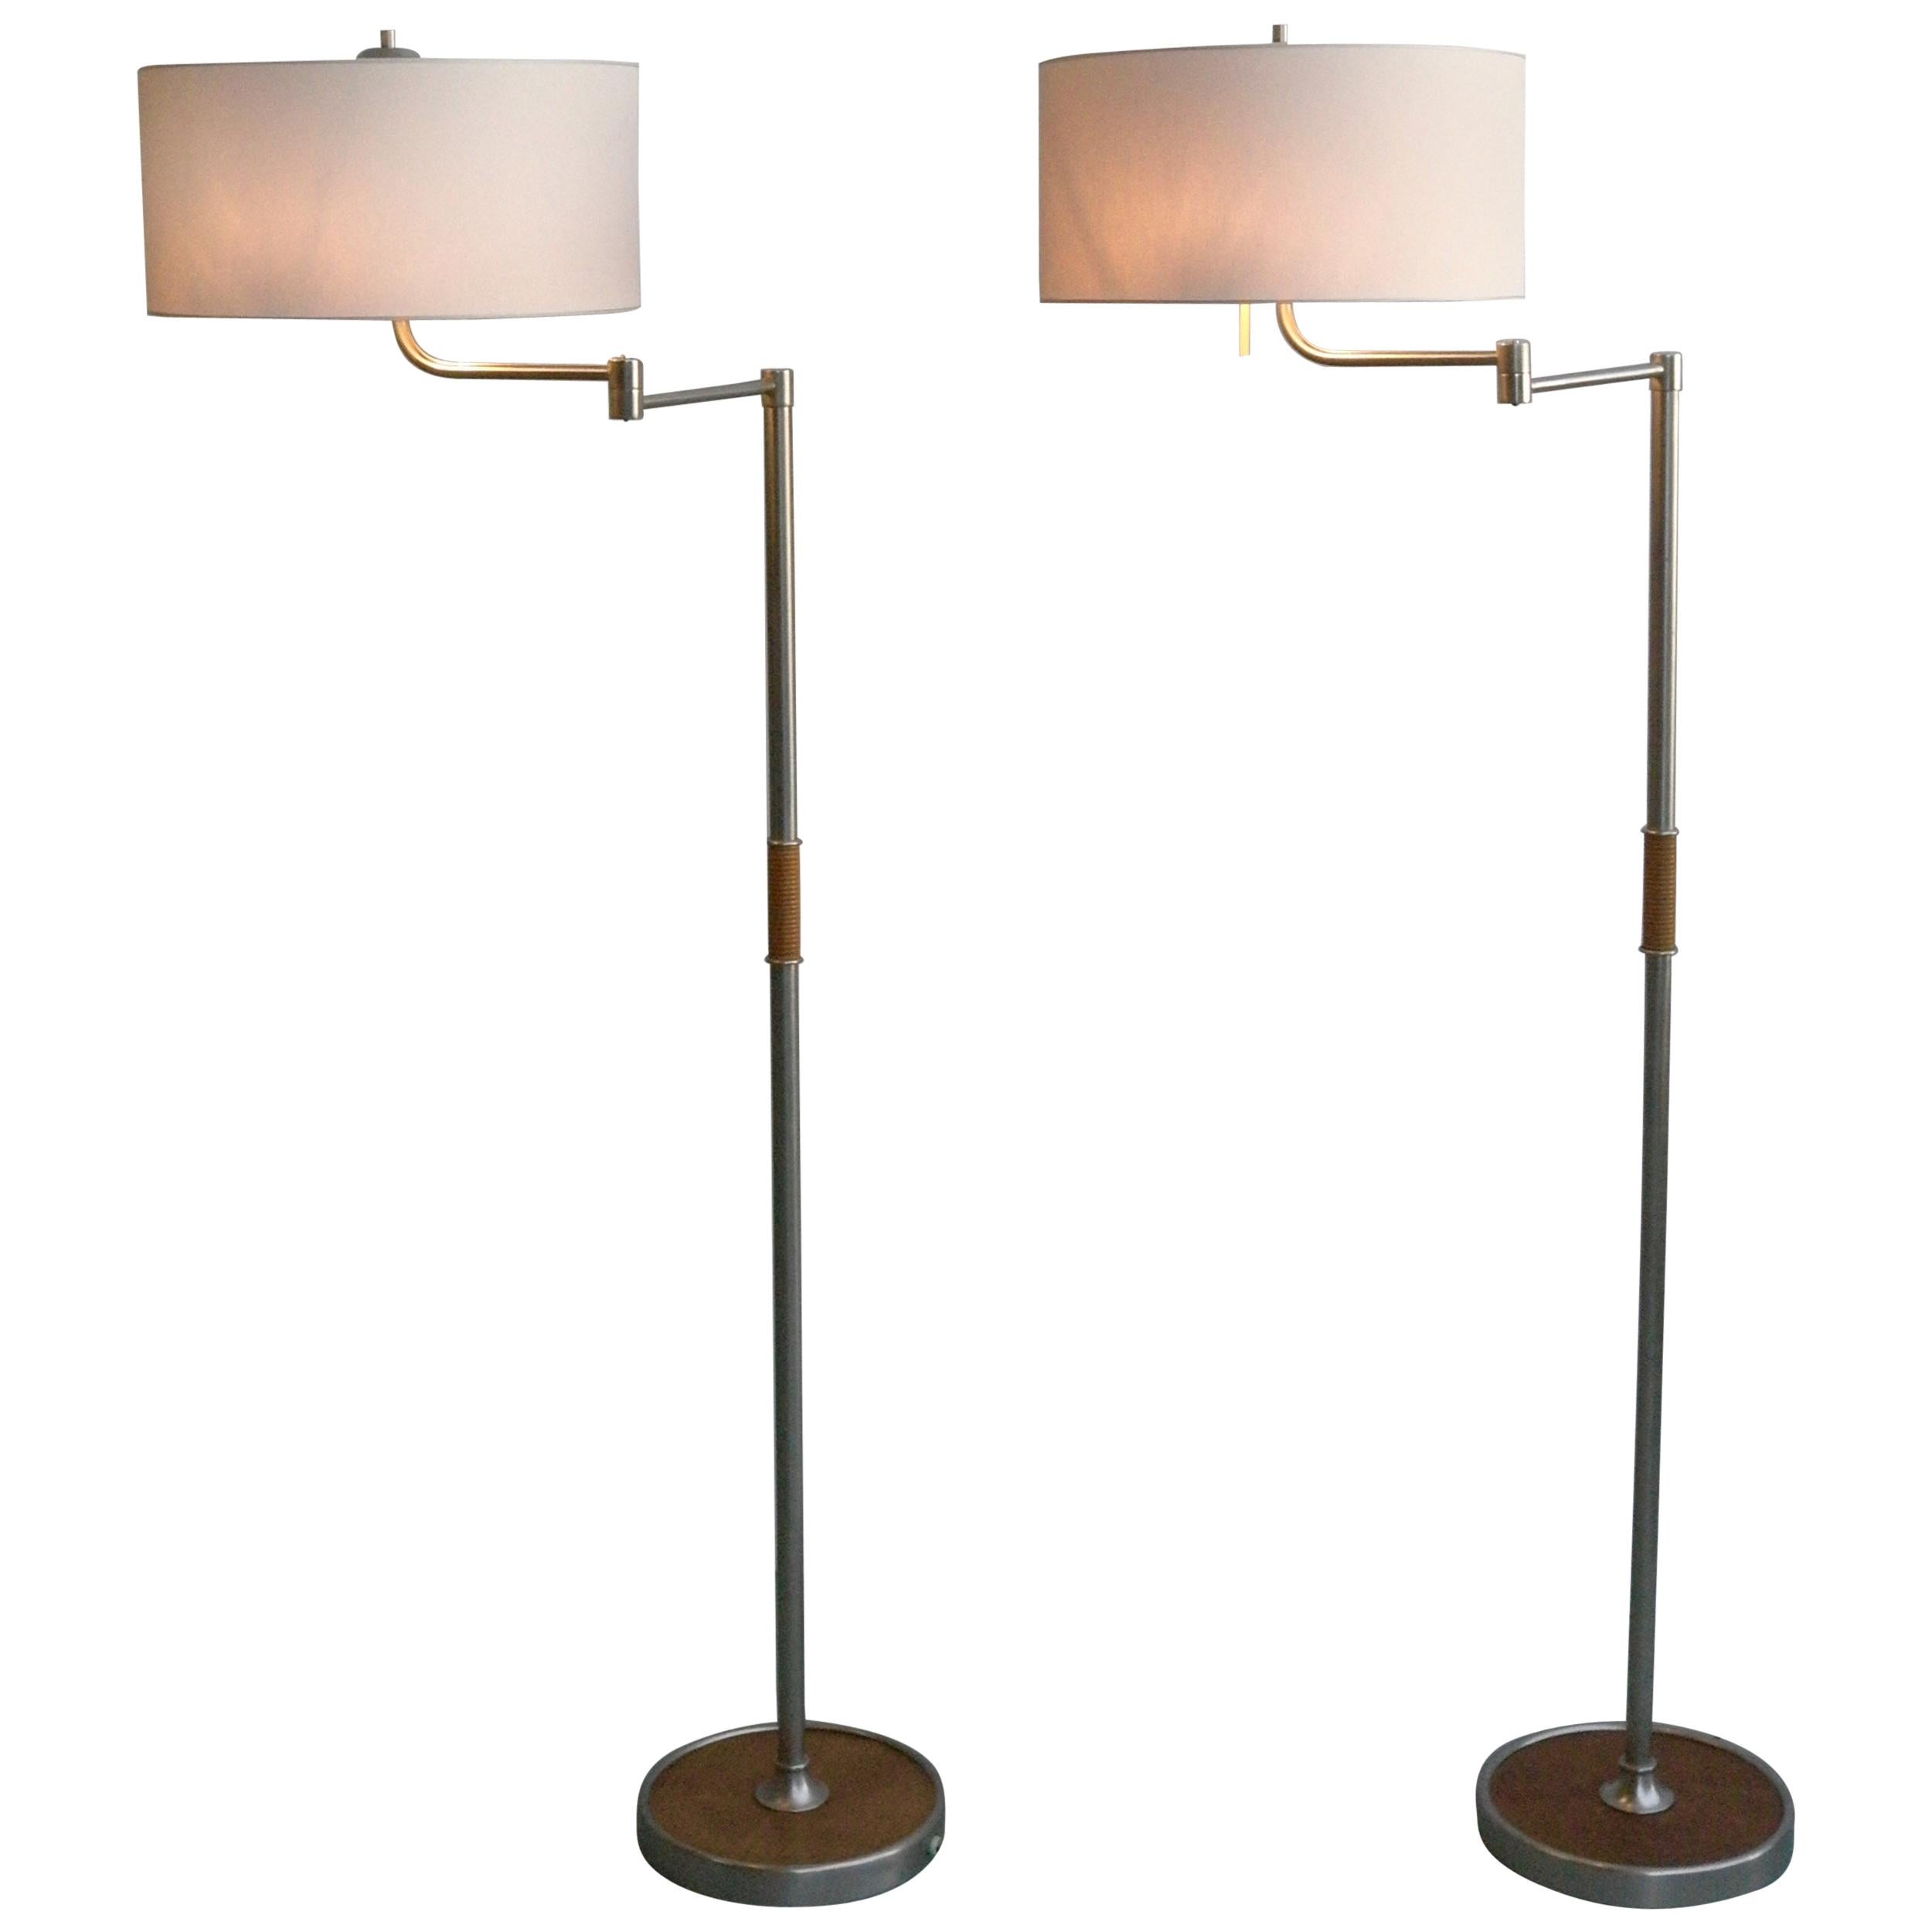 Pair of Midcentury Swing-Arm Floor Lamps in Metal with Faux Bamboo Wood Details For Sale